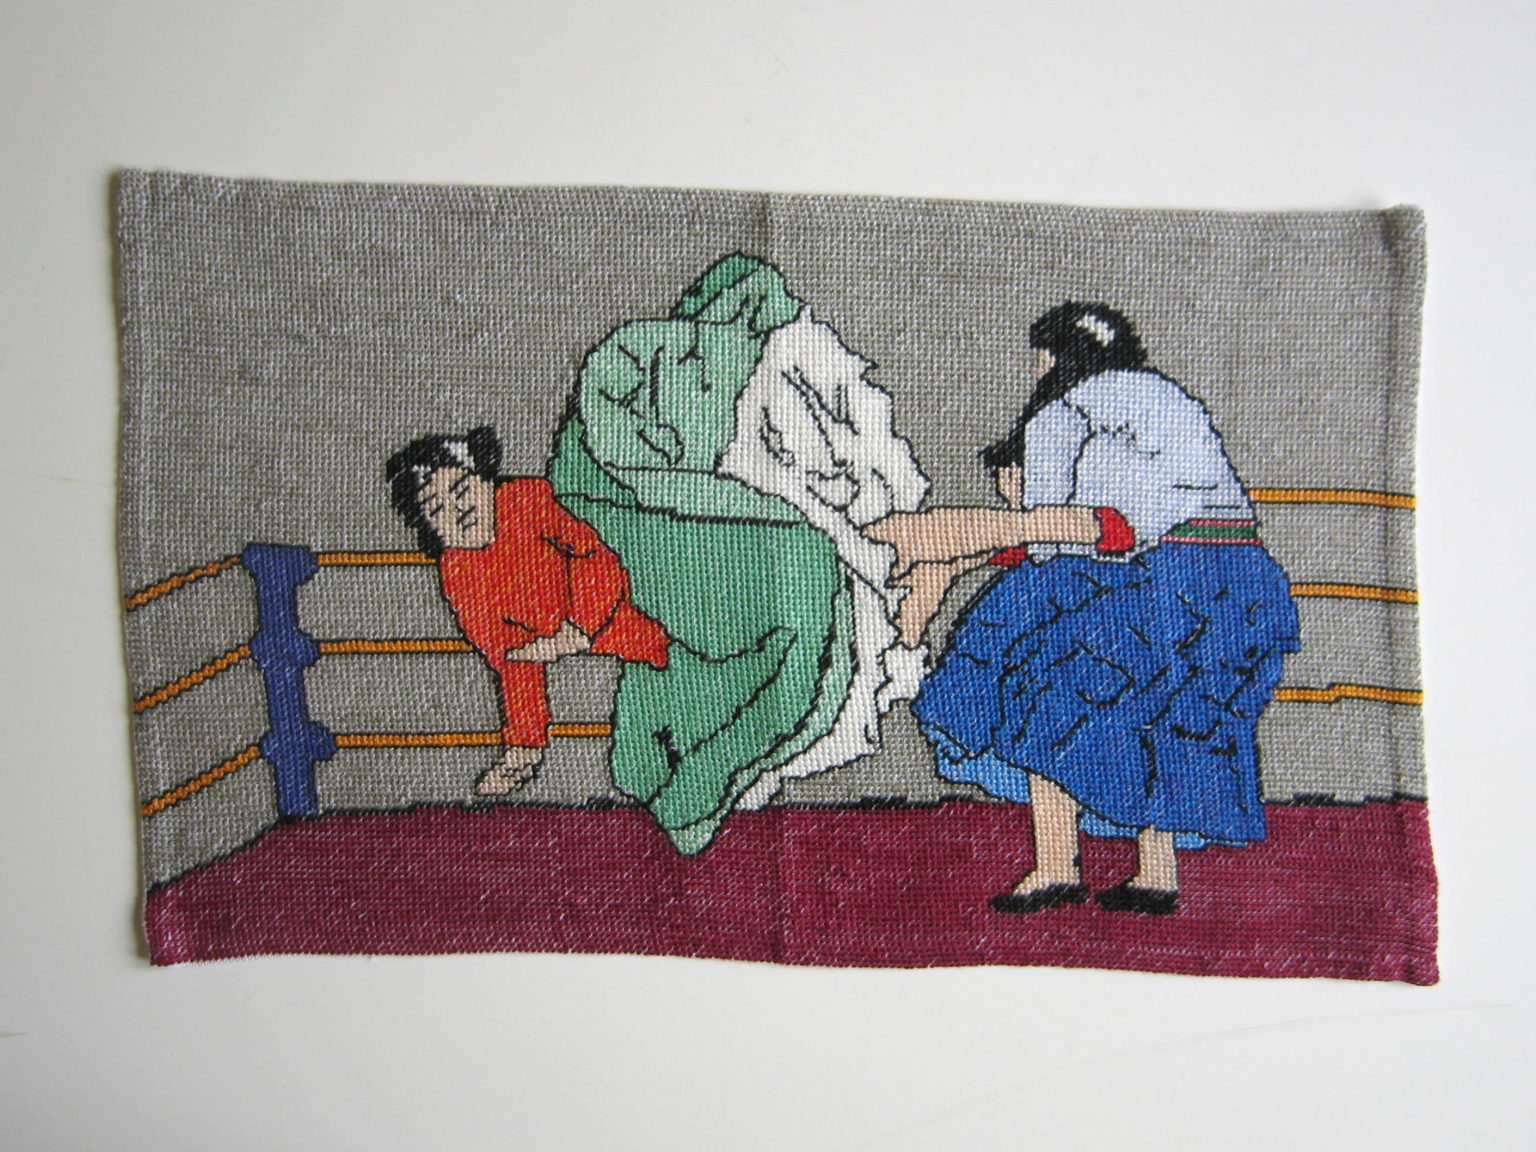 An embroidery by artist and sculptor G. Alexandridis, depicting 2 female Peruvian fighters (cholitas) in the ring. Ένα κέντημα από τον εικαστικό και γλύπτη Γιώργο Αλεξανδρίδη.